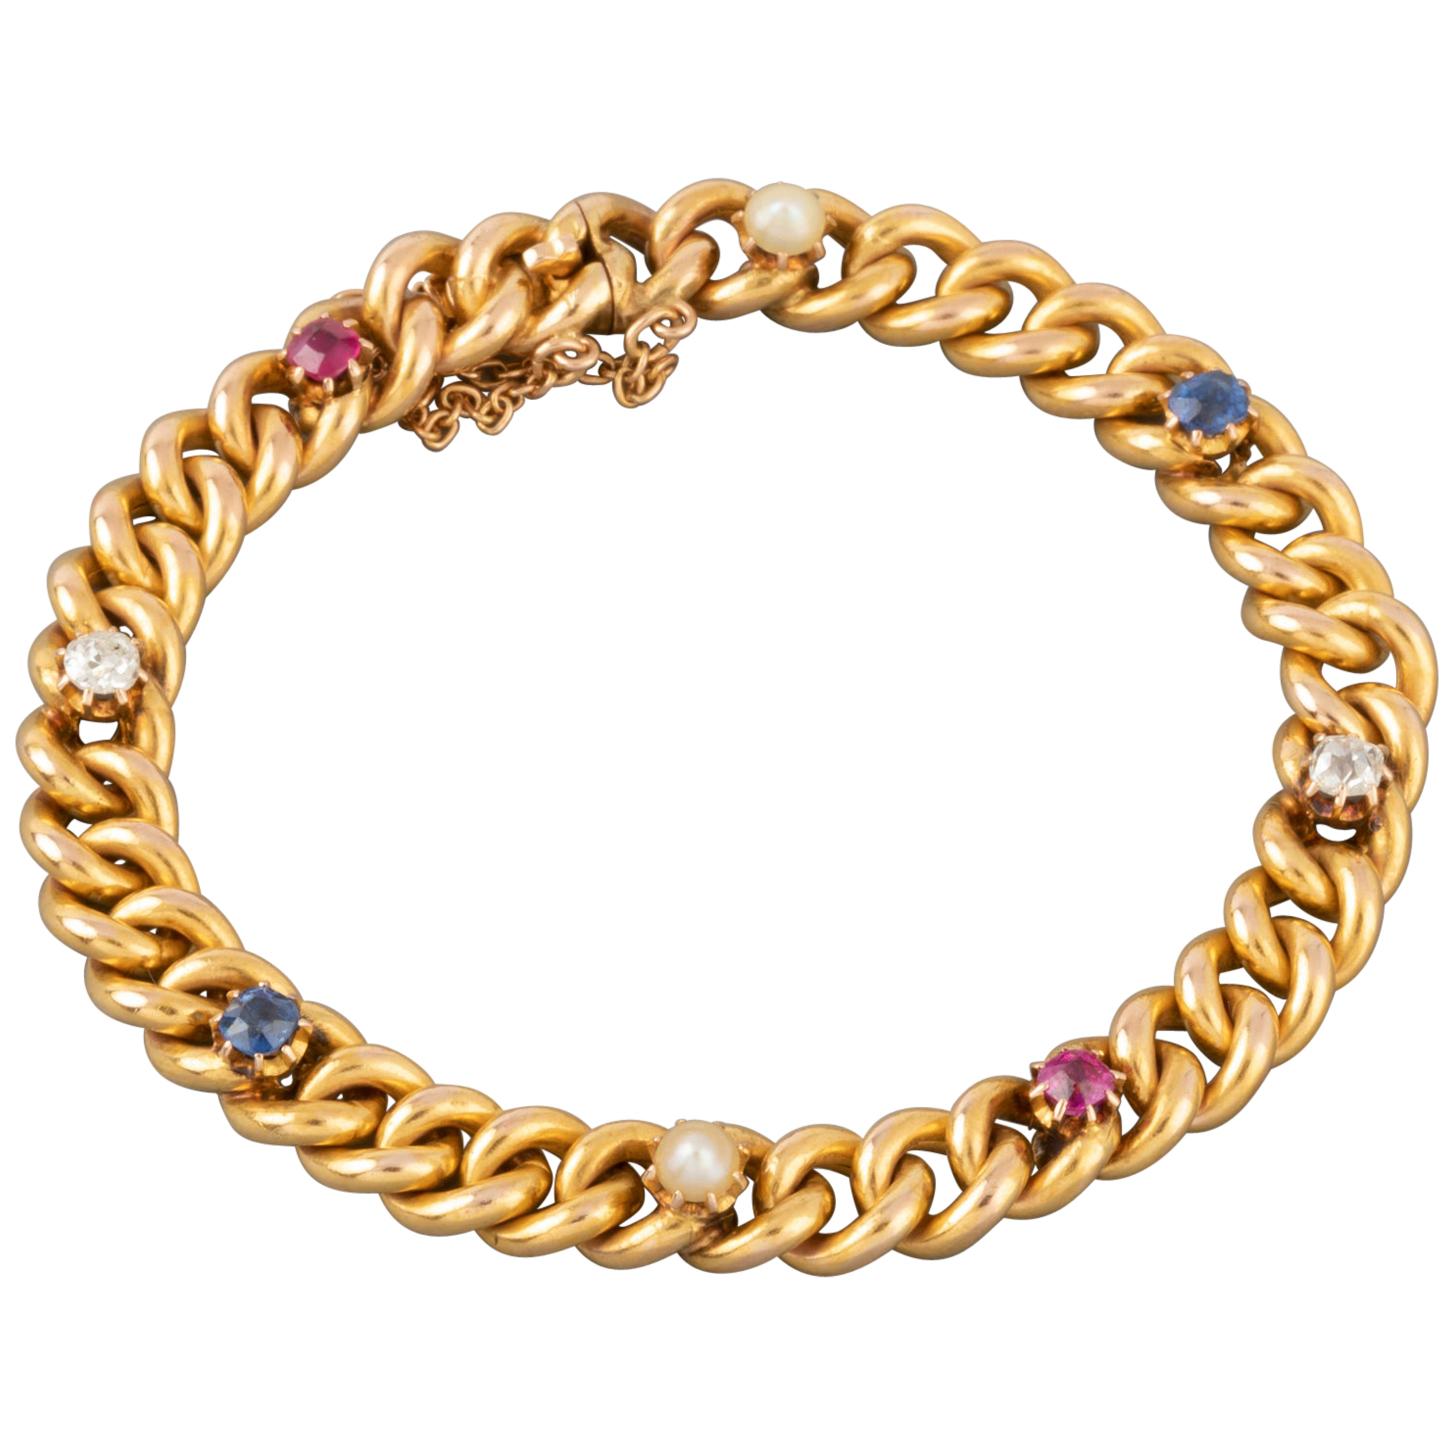 Gold and Precious Stones French Bracelet